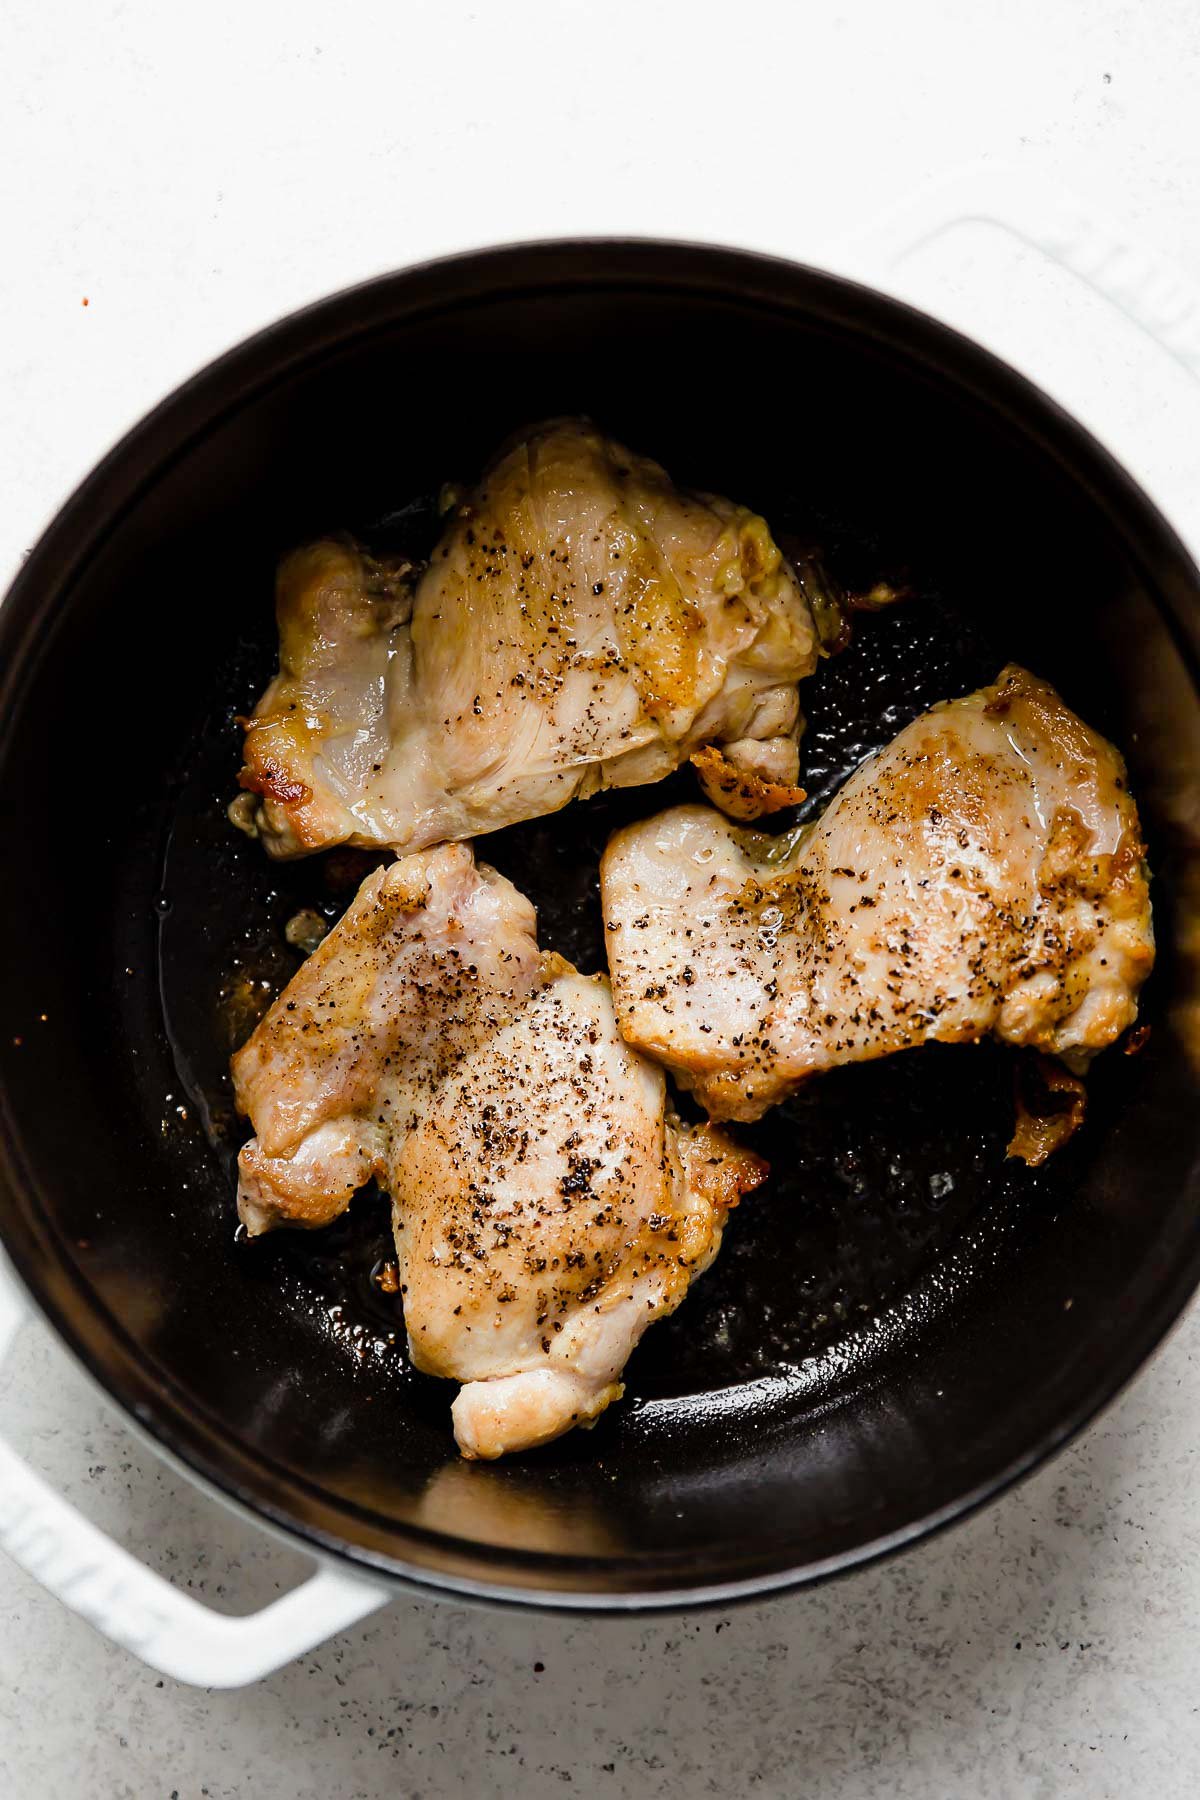 Browning boneless, skinless chicken thighs in a large white Staub cocotte for golden soup. The cocotte pot sits atop a white textured surface.